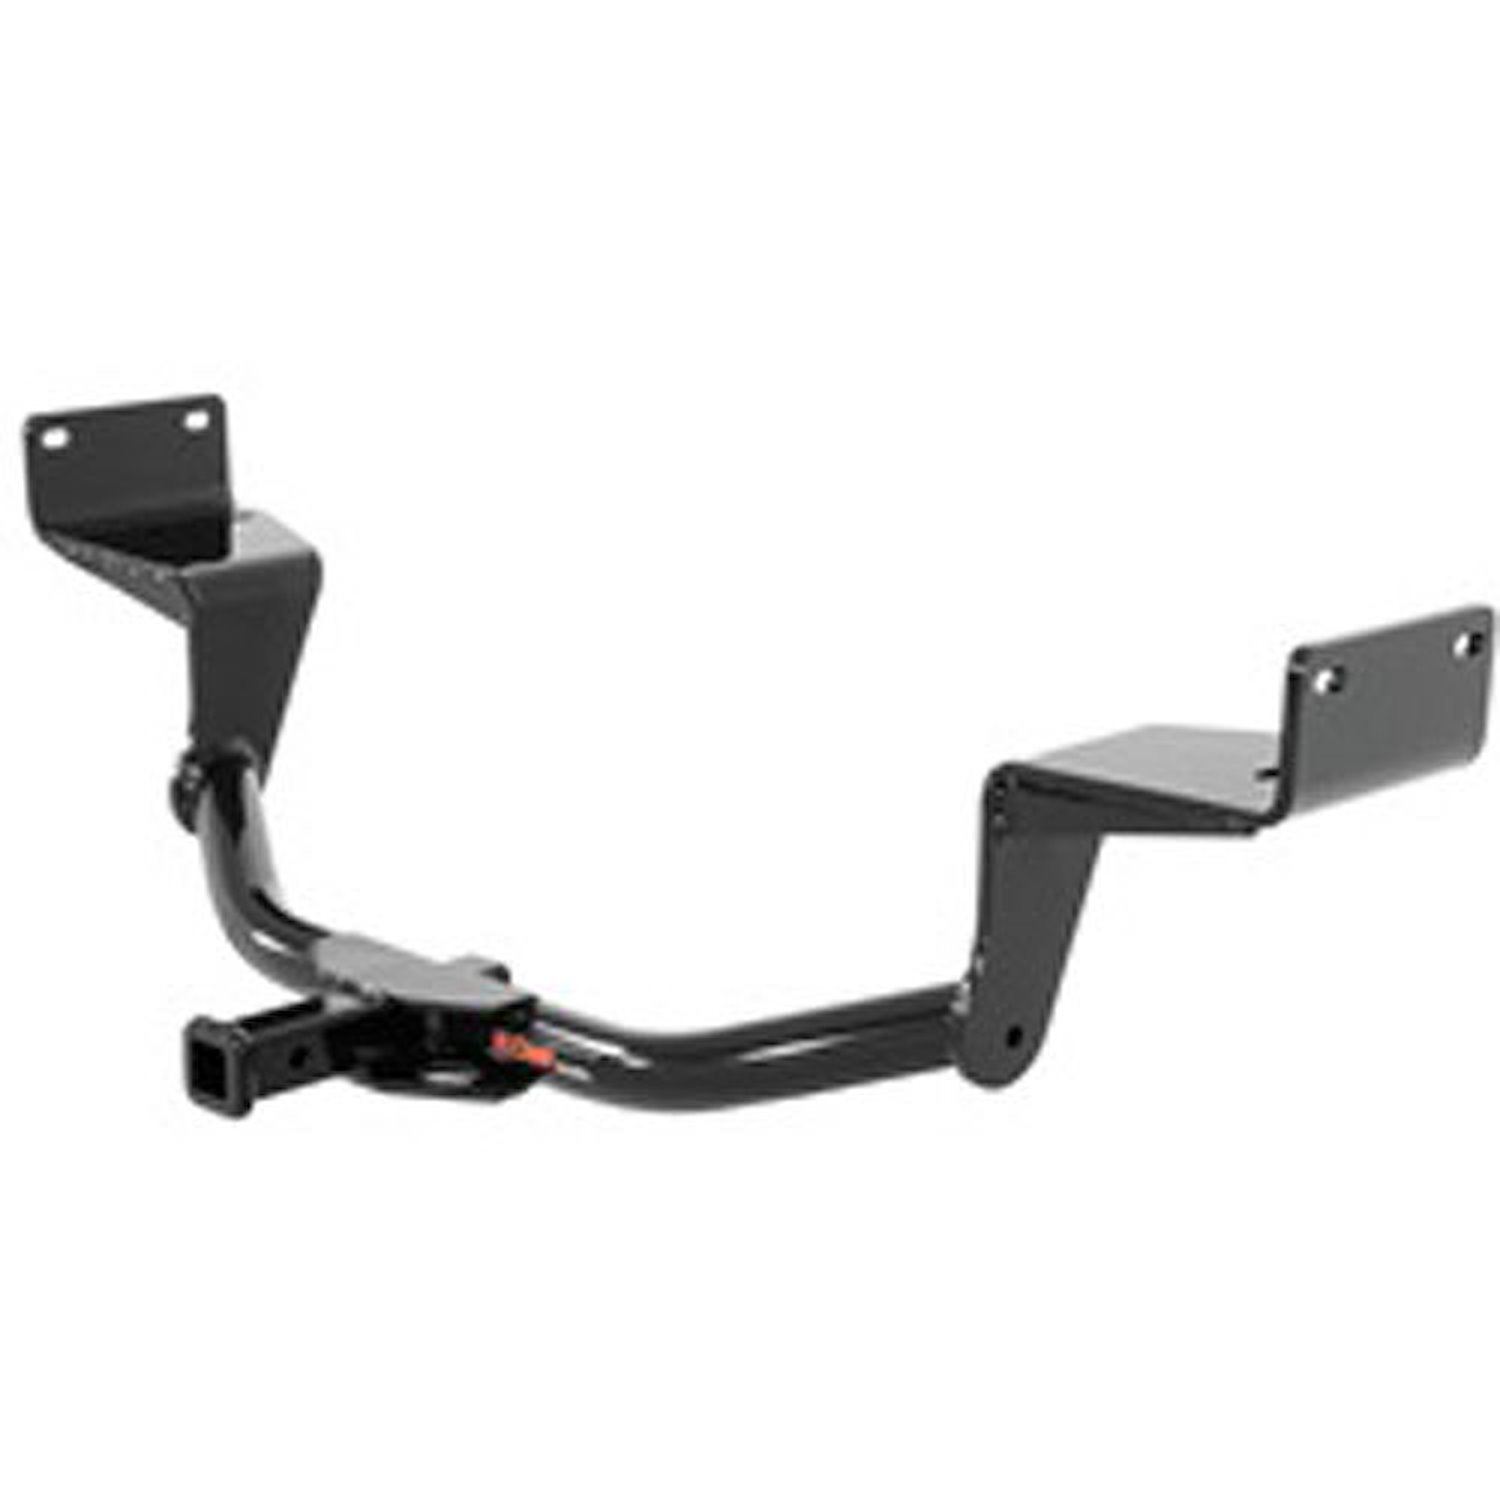 Class 1 Trailer Hitch 2015.0 - 2015.0 Ford Mustang Coupe